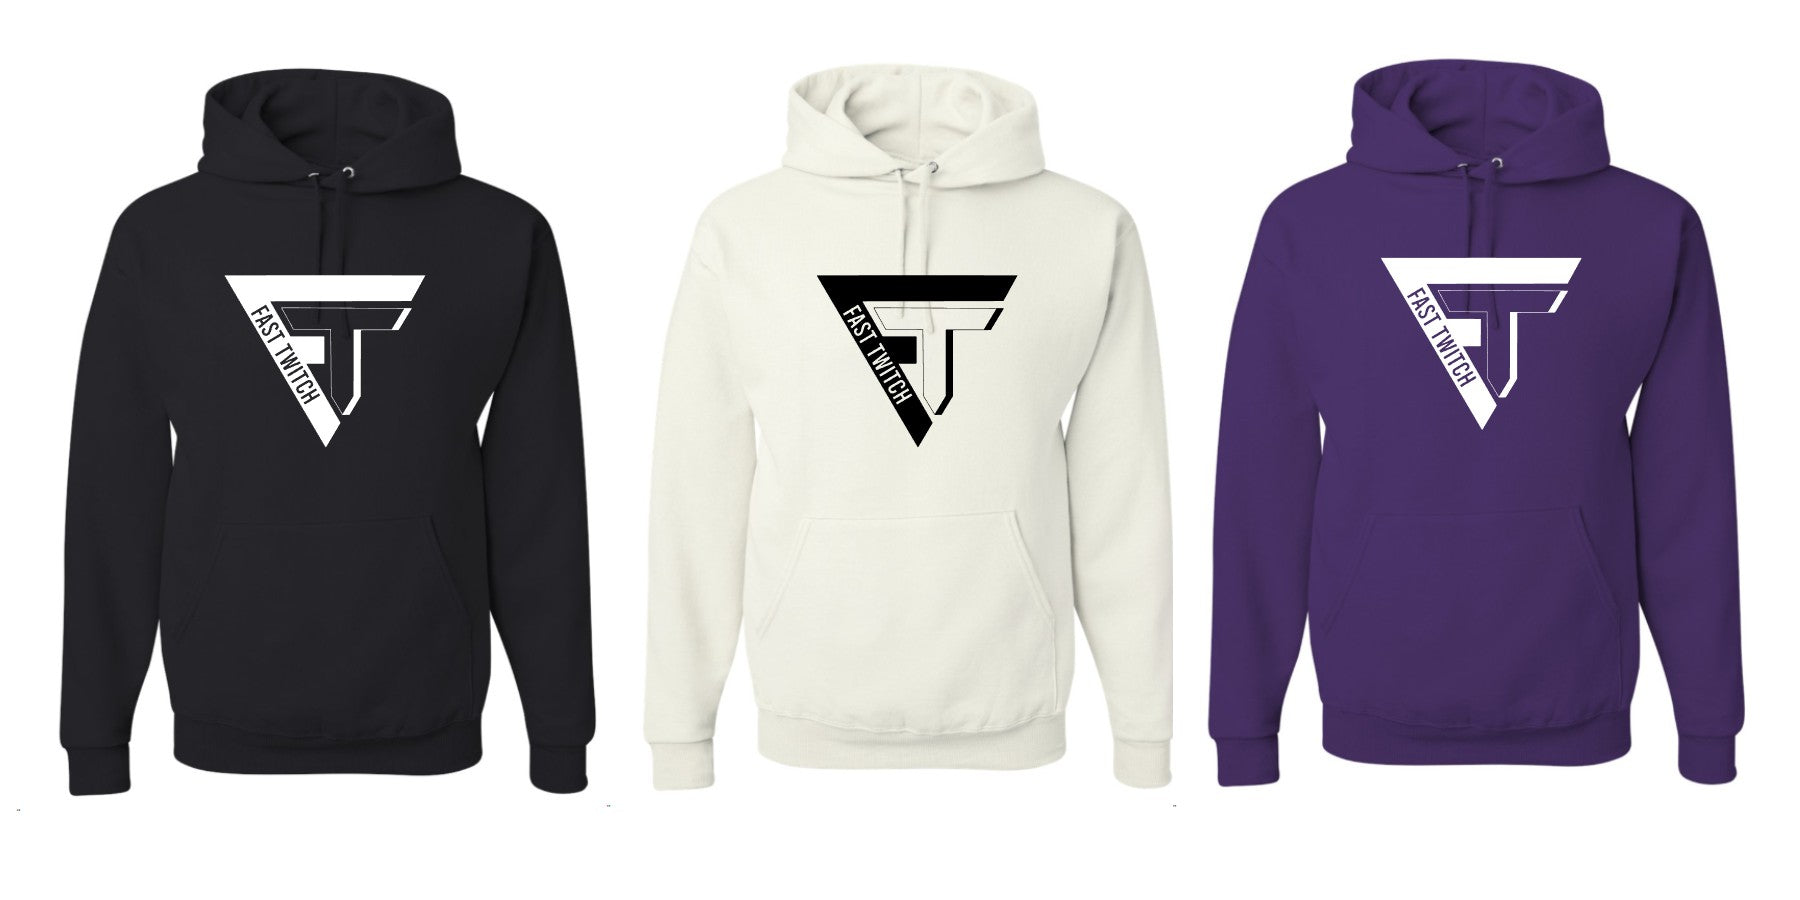 FAST TWITCH HOODIE